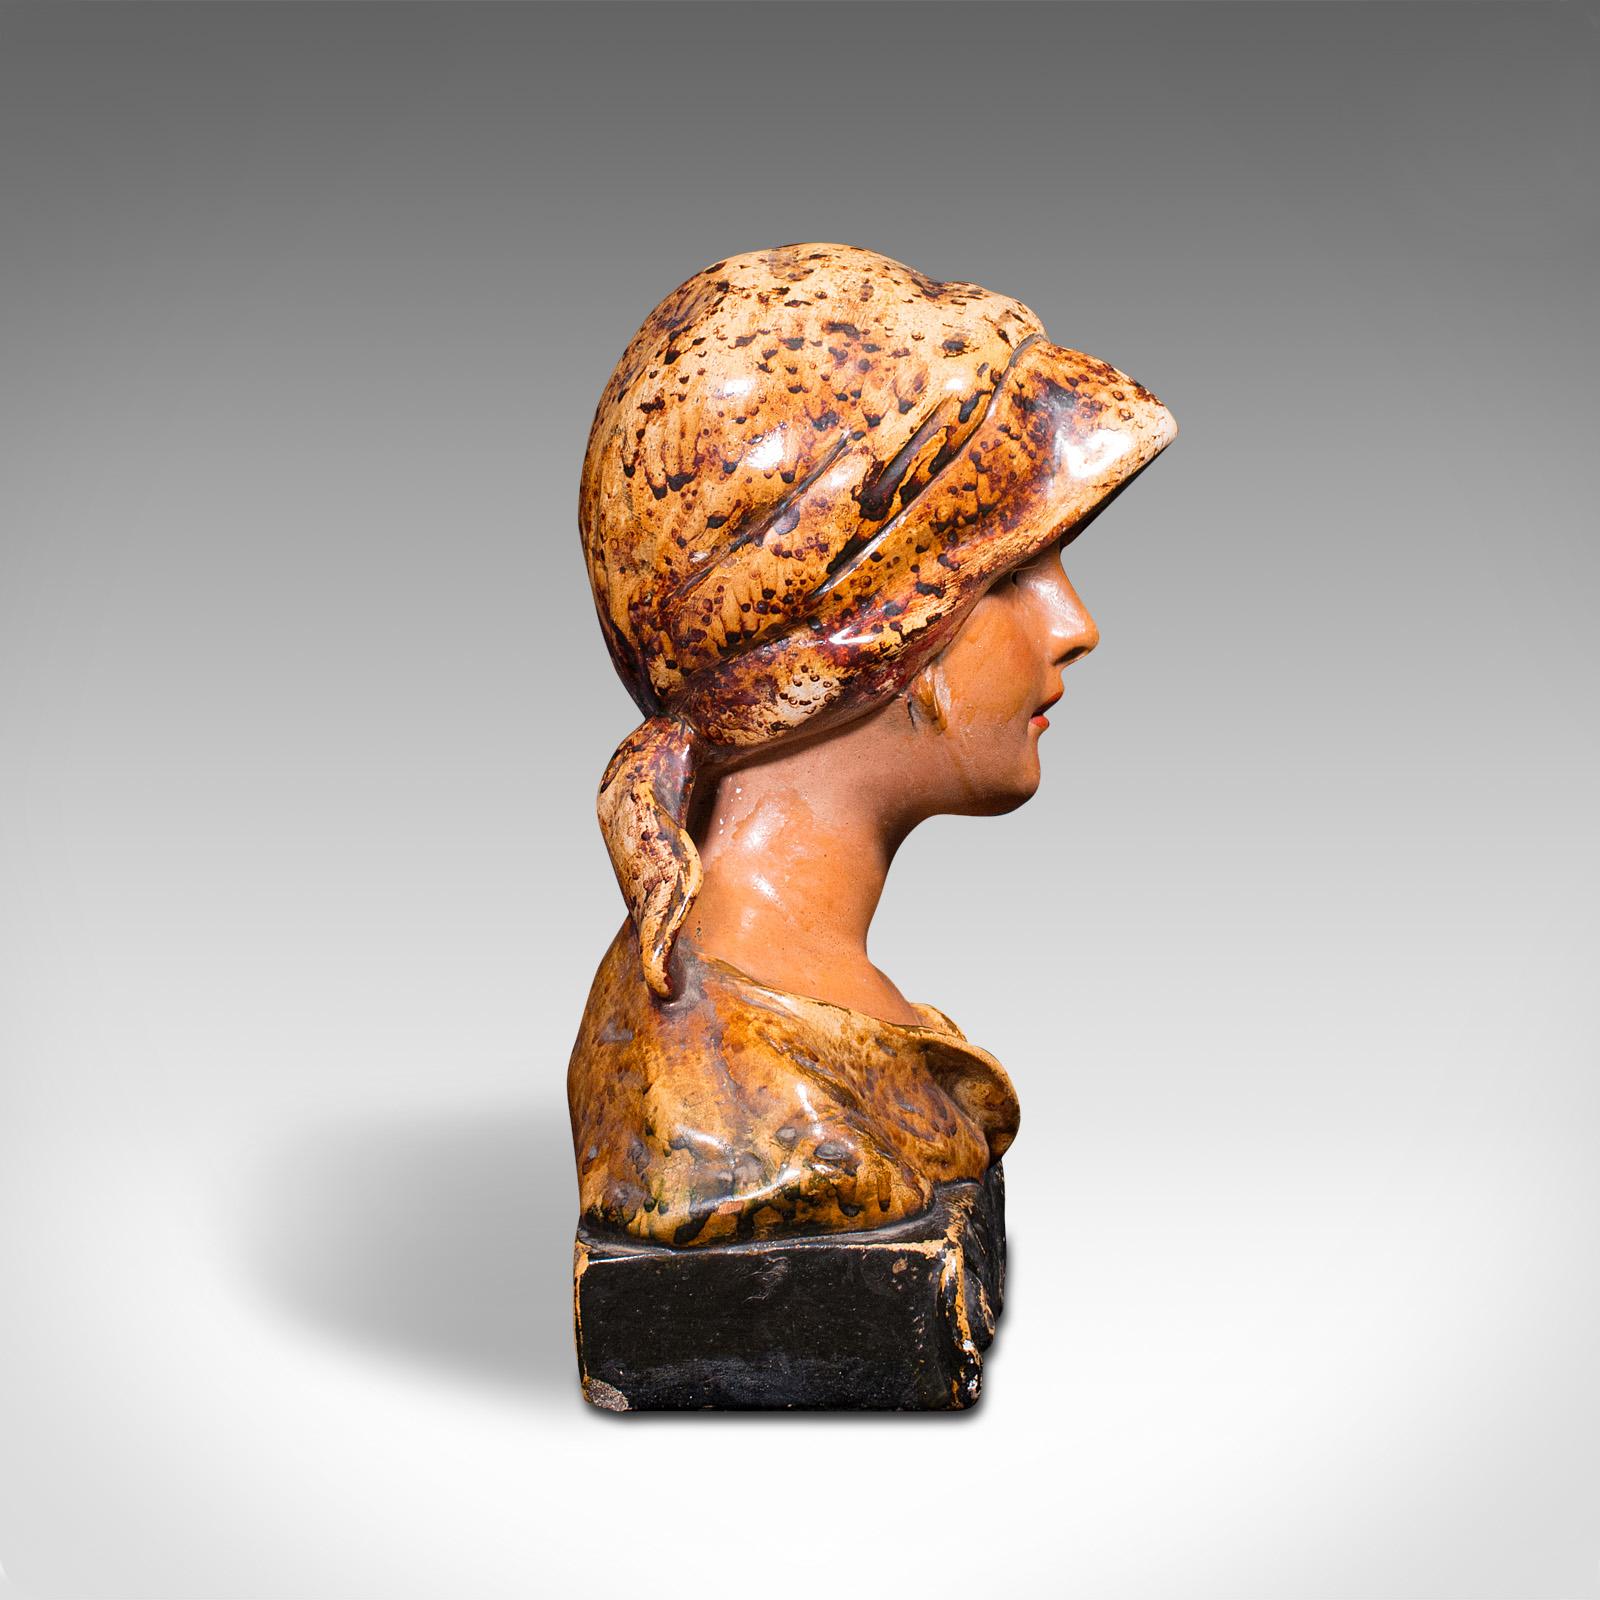 This is an antique portrait bust. A French, plaster decorative female figure, dating to the late Victorian period, circa 1900.

A fin de siècle Parisian young woman in the Art Nouveau manner
Displays a desirable aged patina and in good